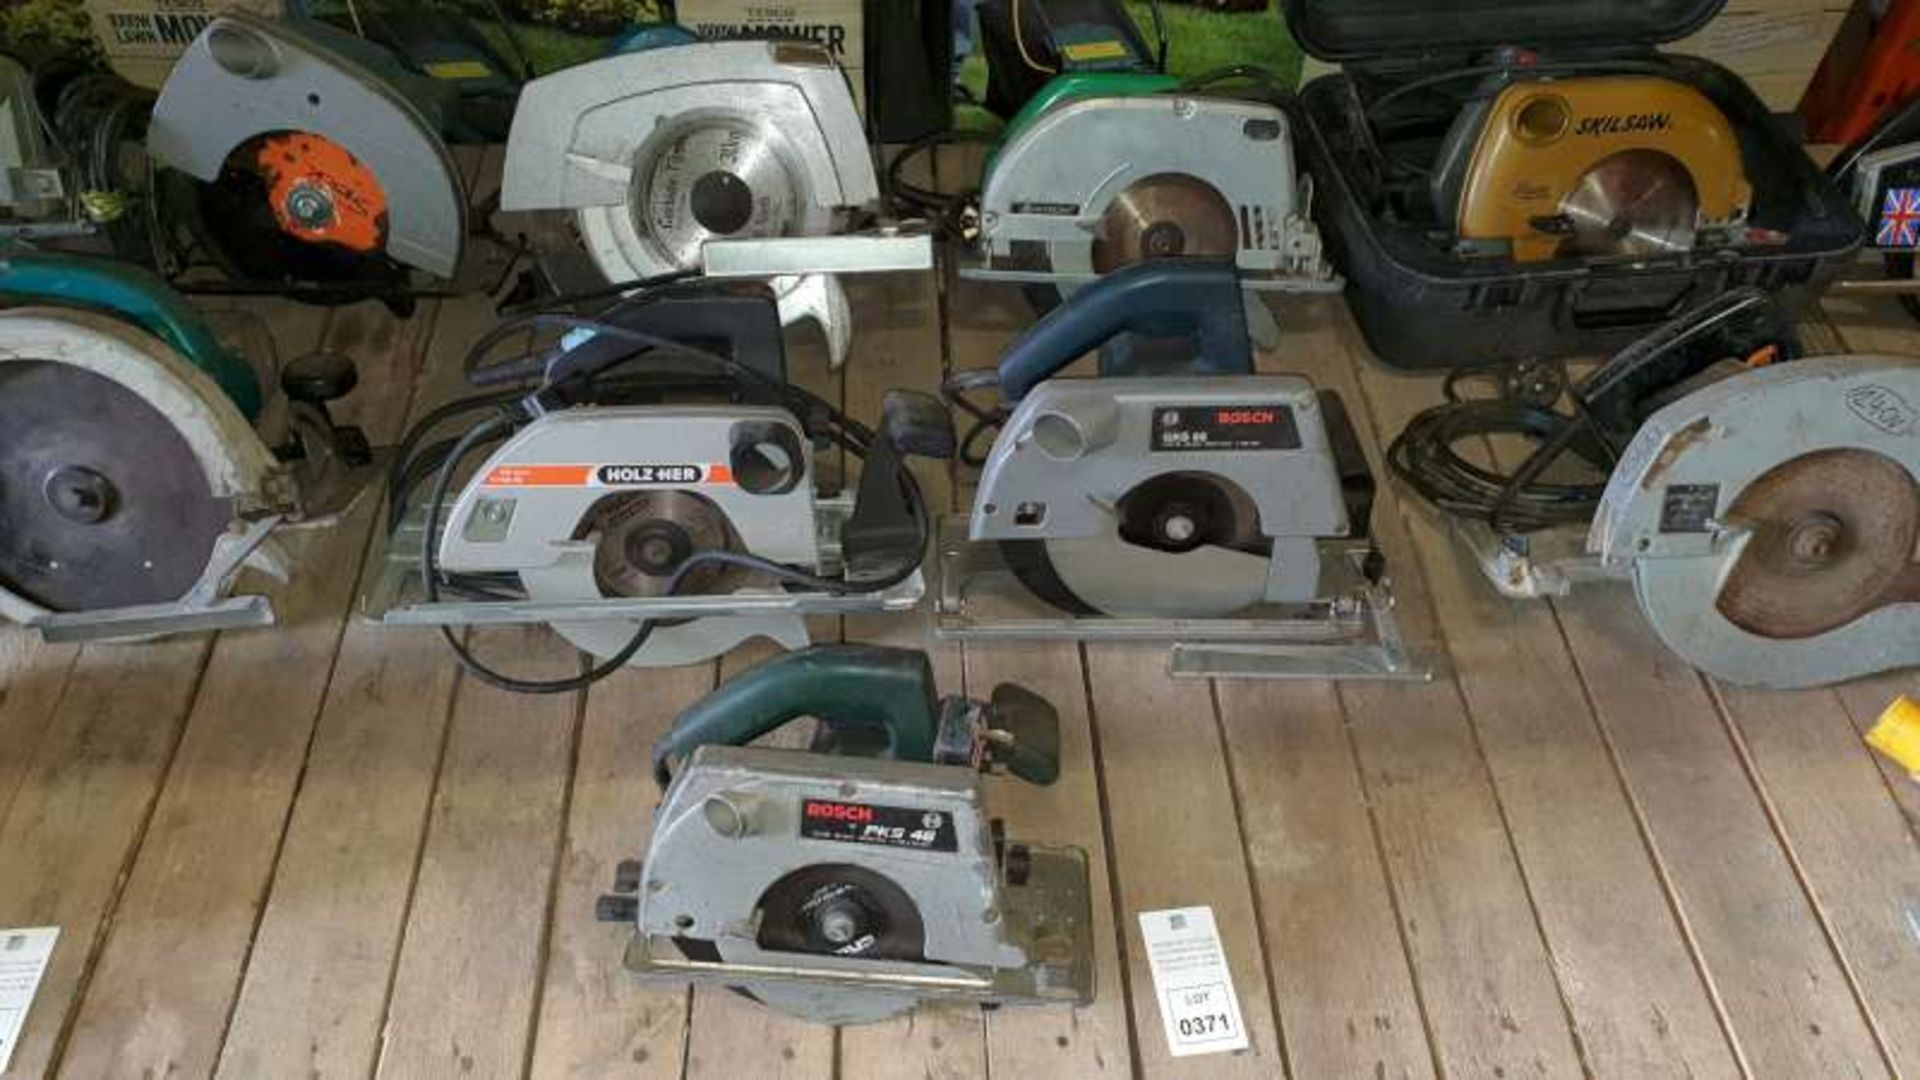 TOOL LOT CONTAINING 5 X CIRCULAR SAWS IE BOSCH, HOLZ HER, ETC